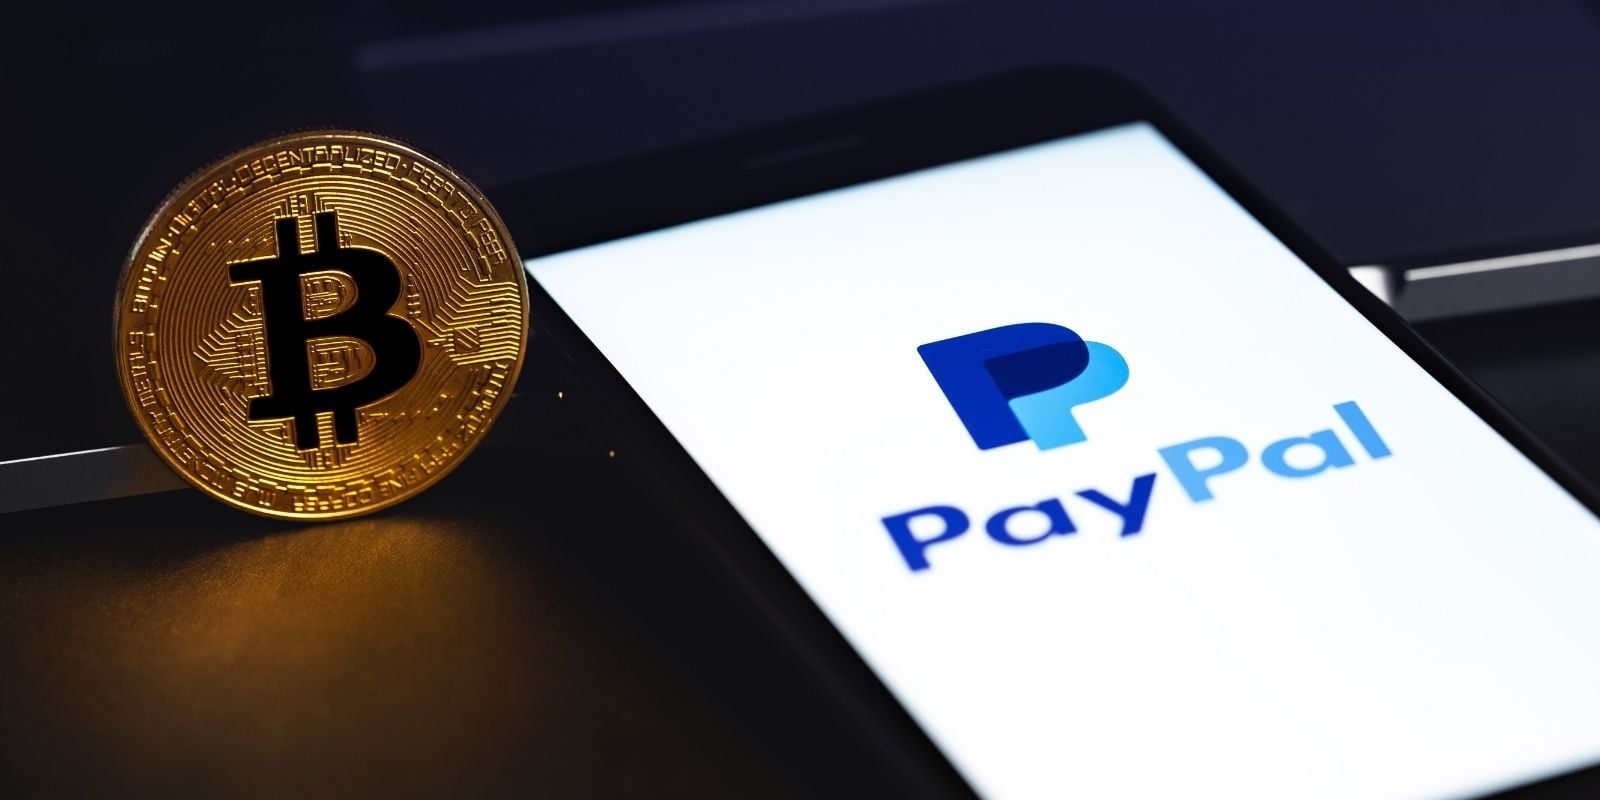 Paypal and Bitcoin Services